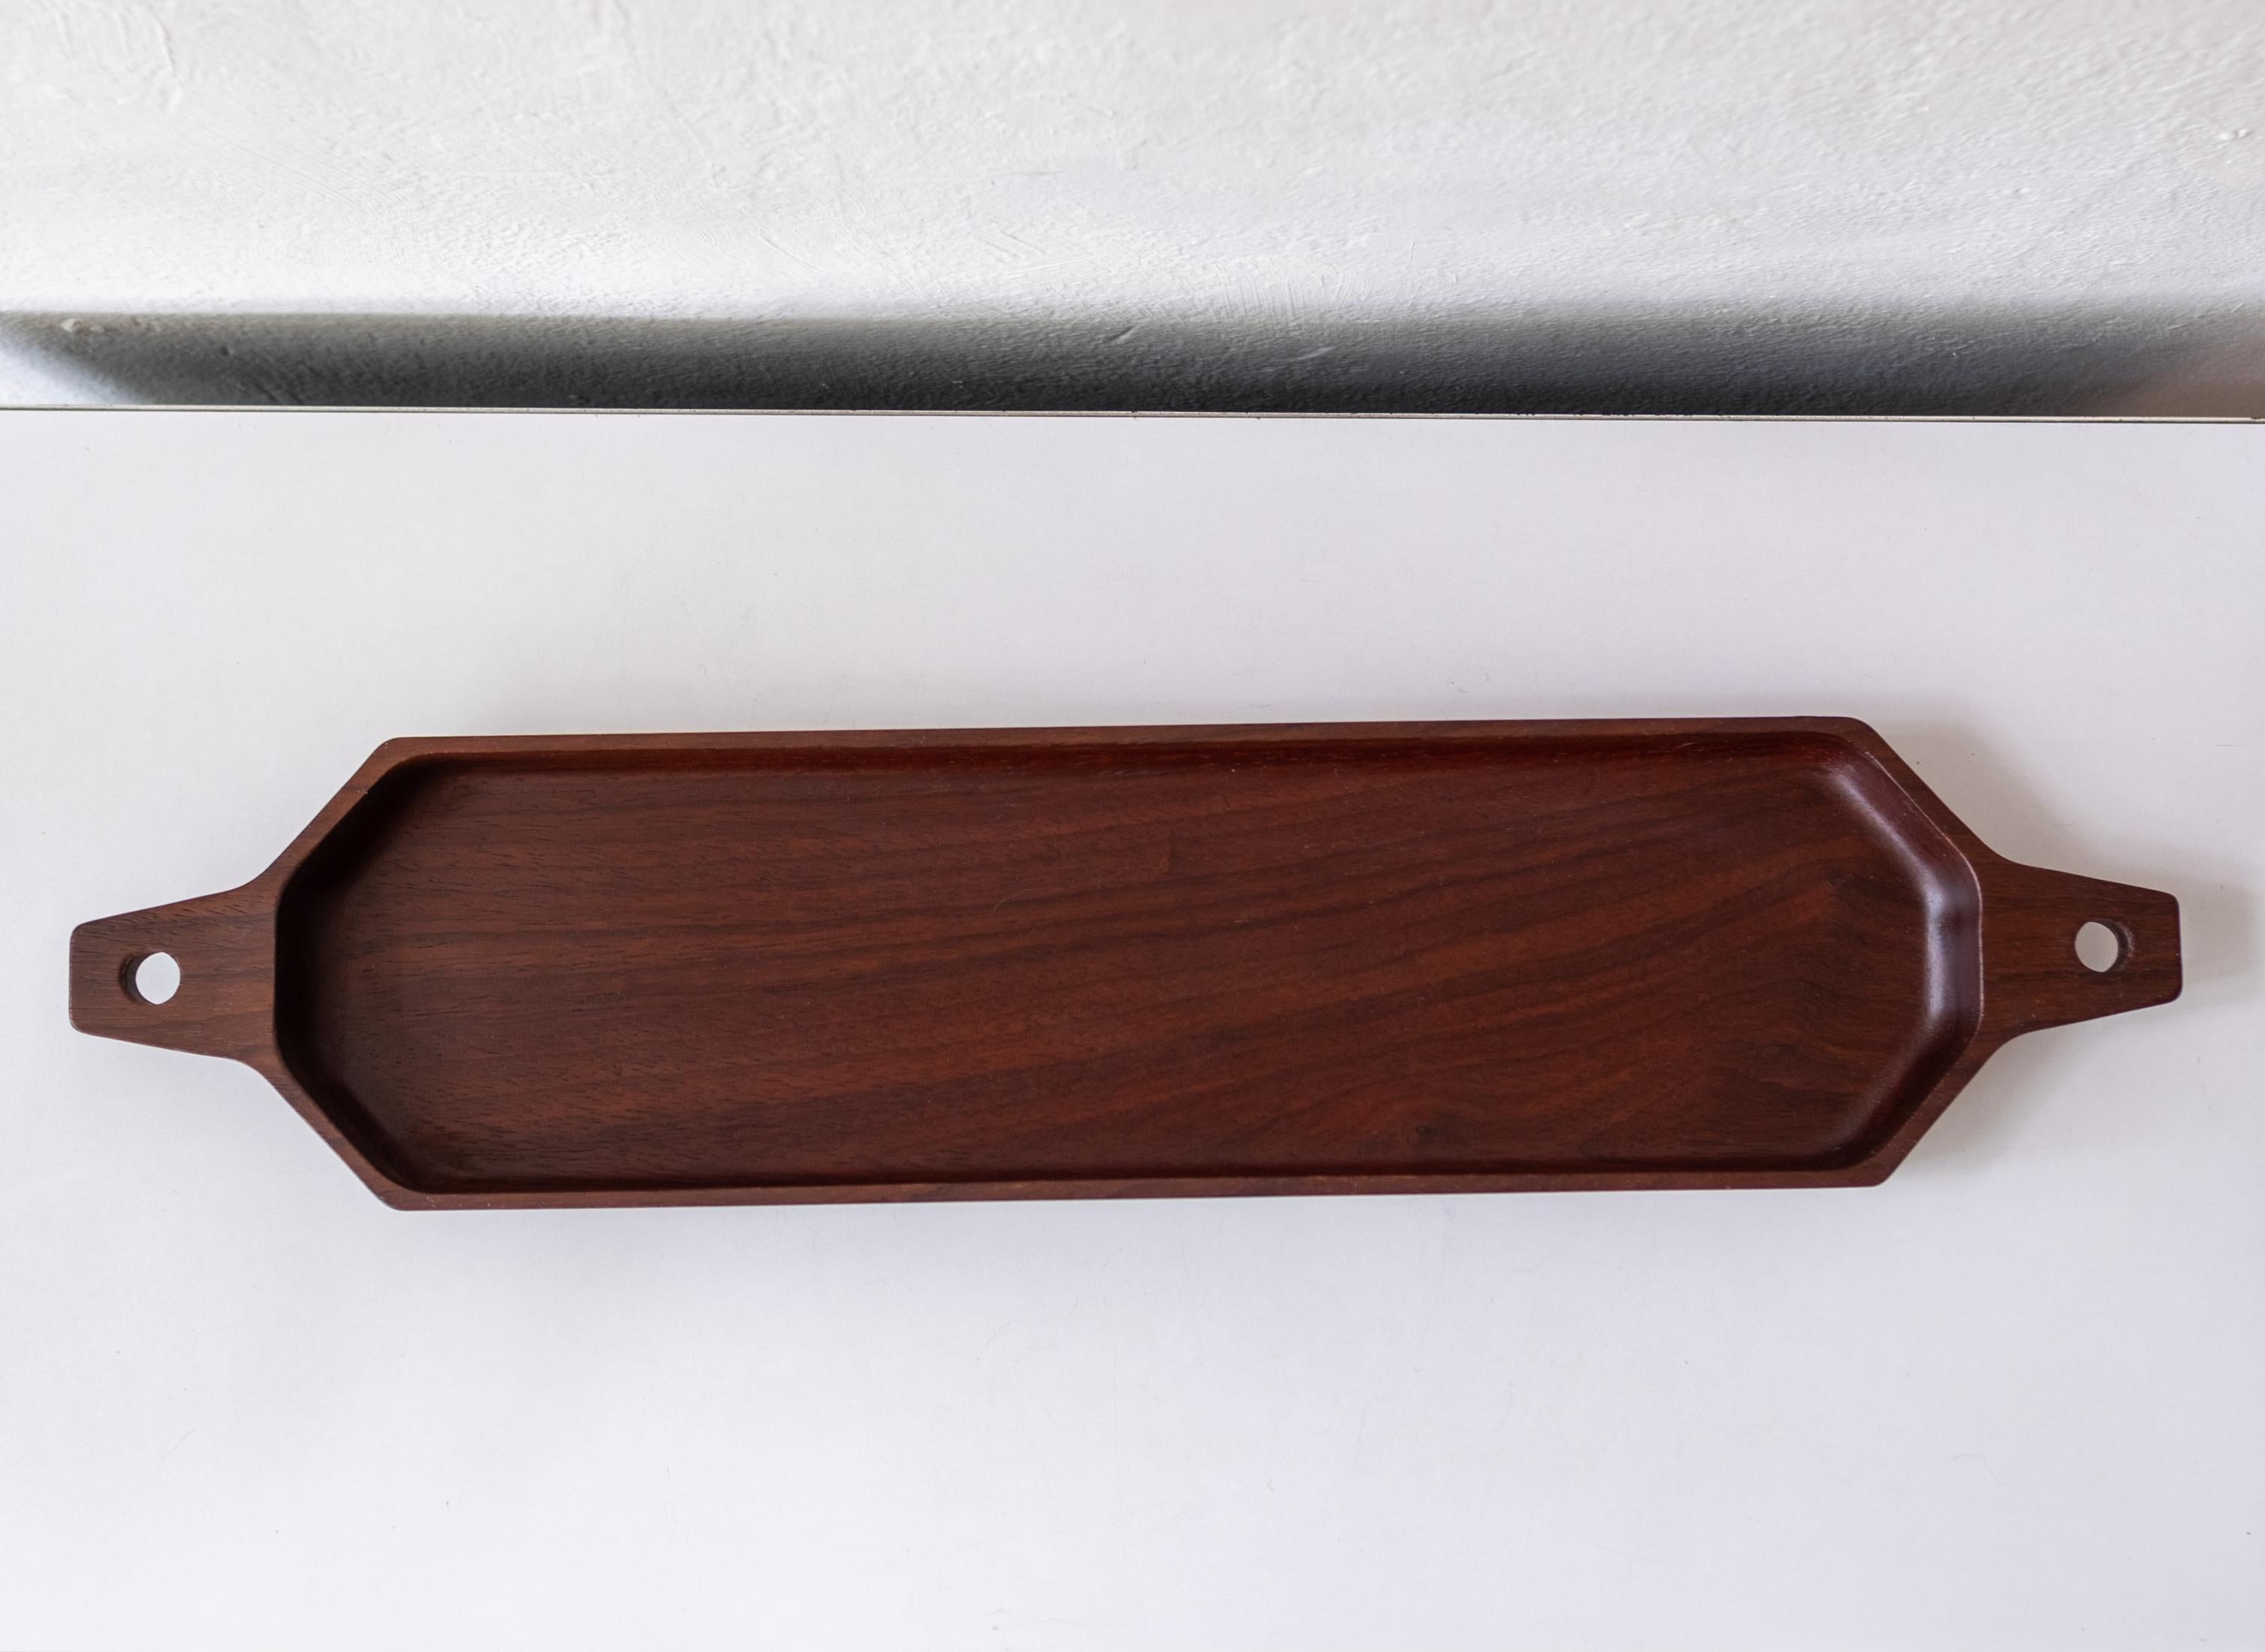 Sculptural Midcentury Italian Wood Centerpiece Bowl or Catch All by Anri, 1950s For Sale 4